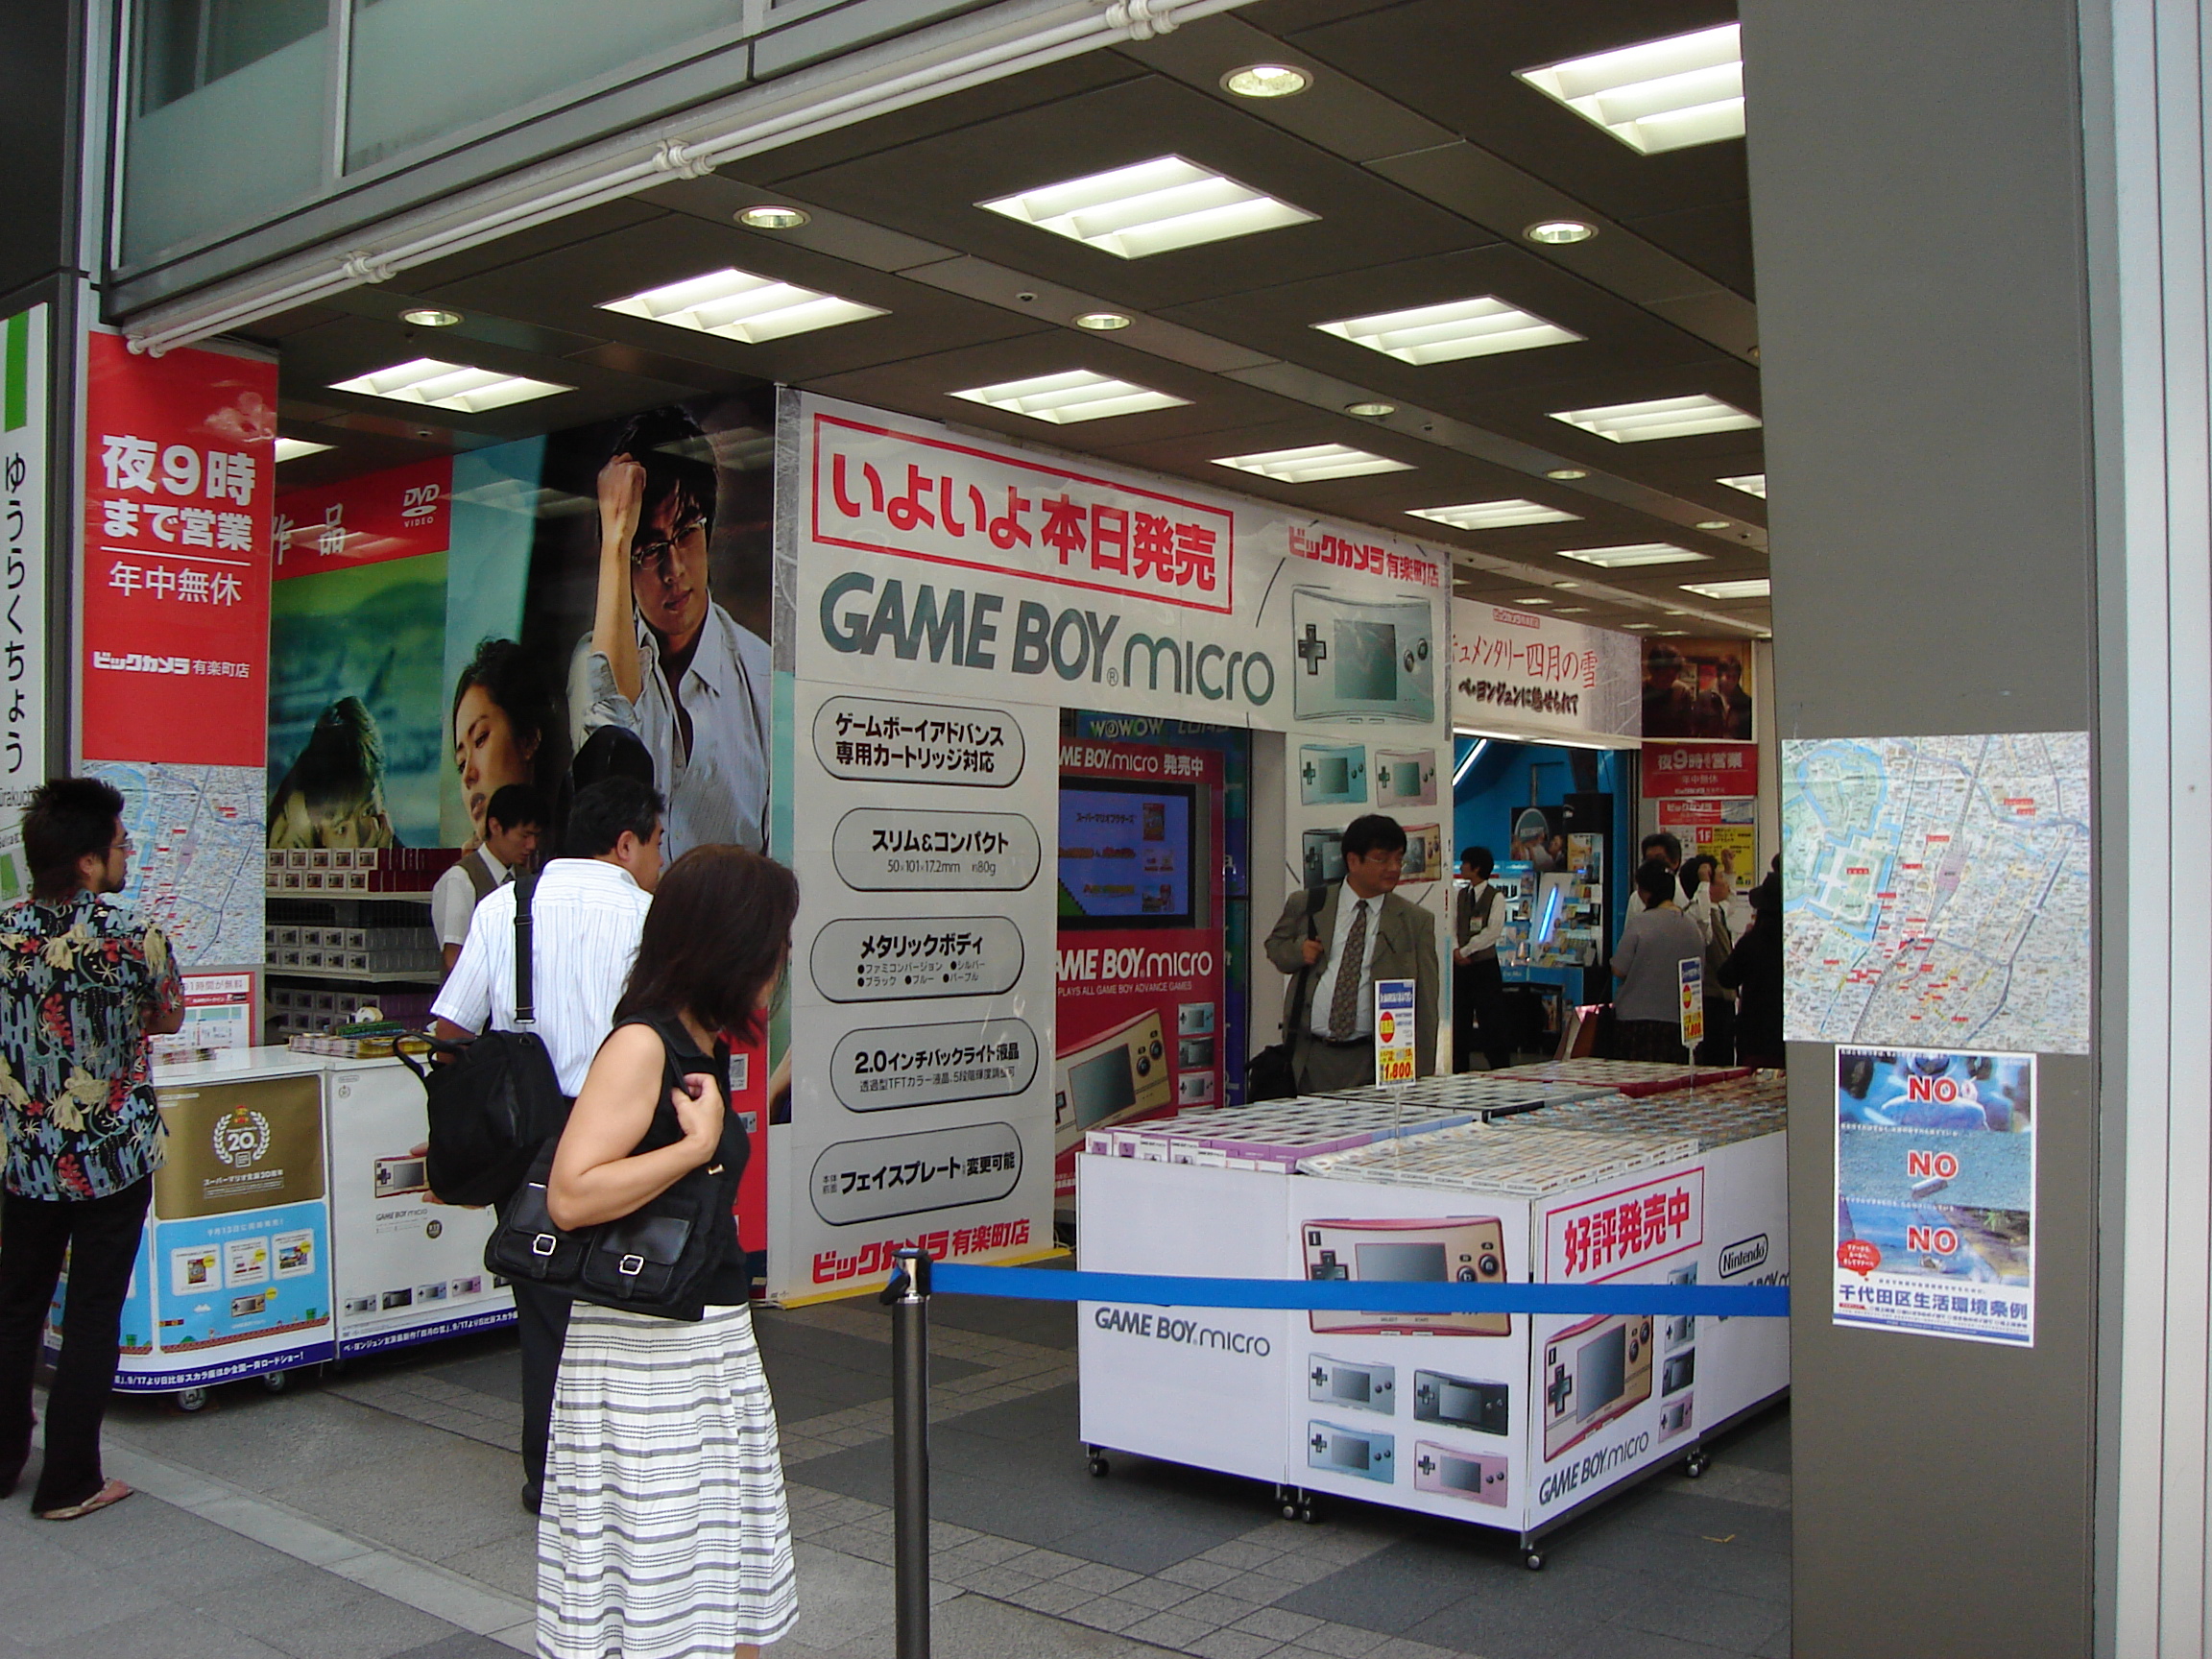 a woman looks curiously at a display and signs for gameboy micro at a store entrance